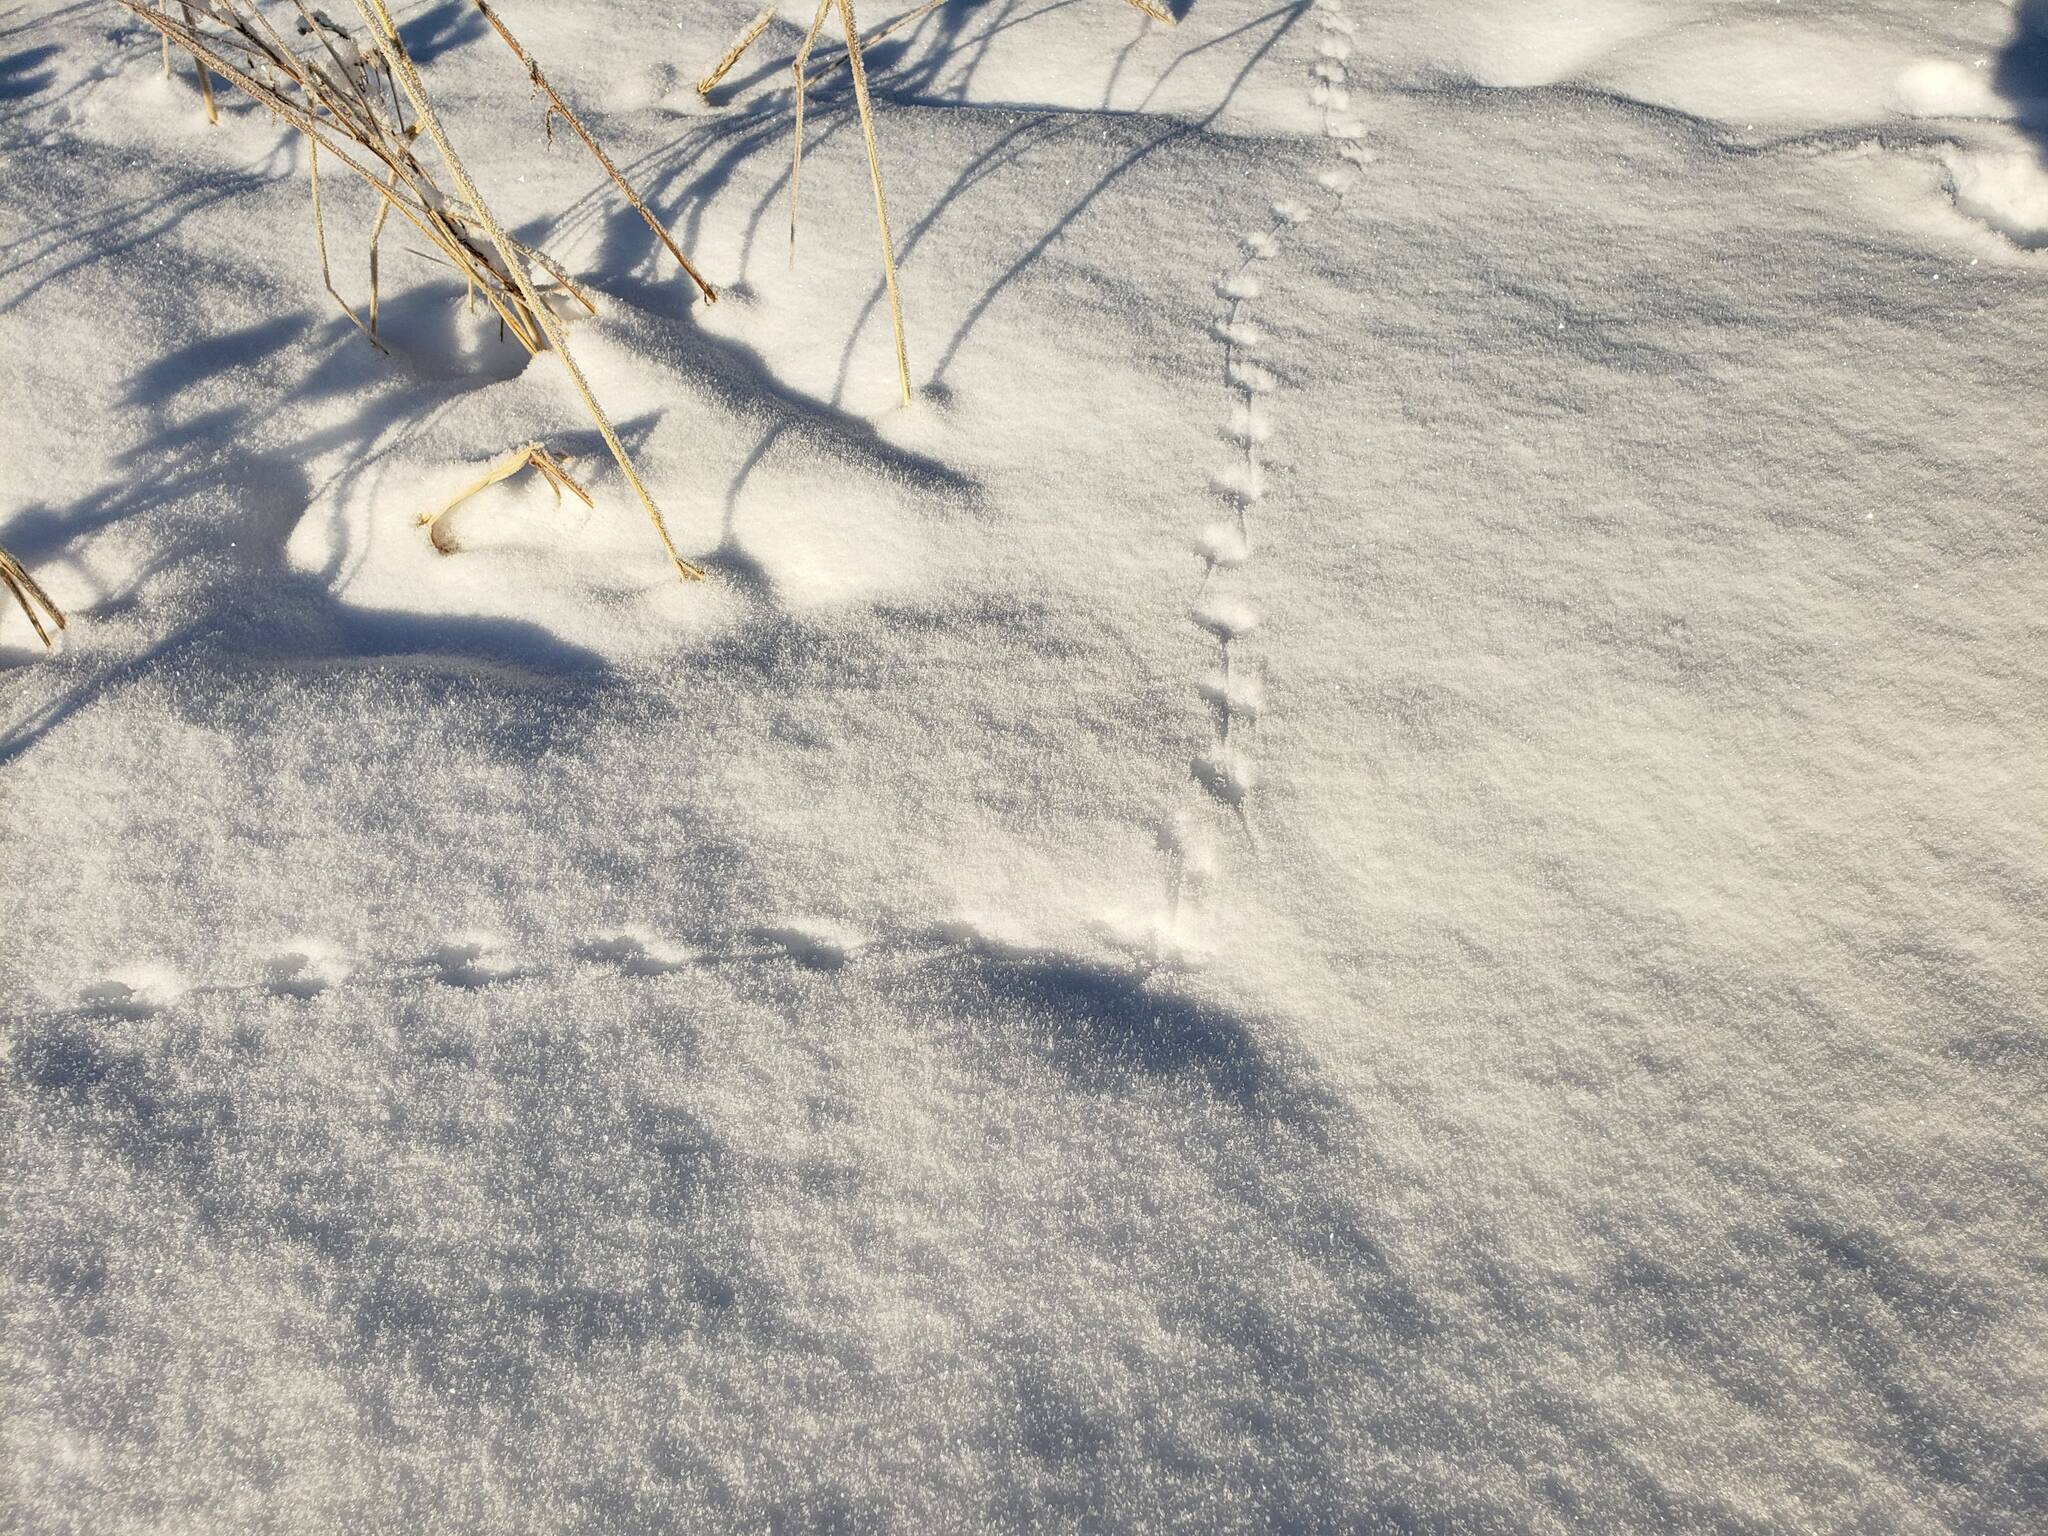 Voles left several trackways at the edge of the wetlands; a tail-drag mark shows behind the foot marks. (Courtesy Photo / David Bergeson)